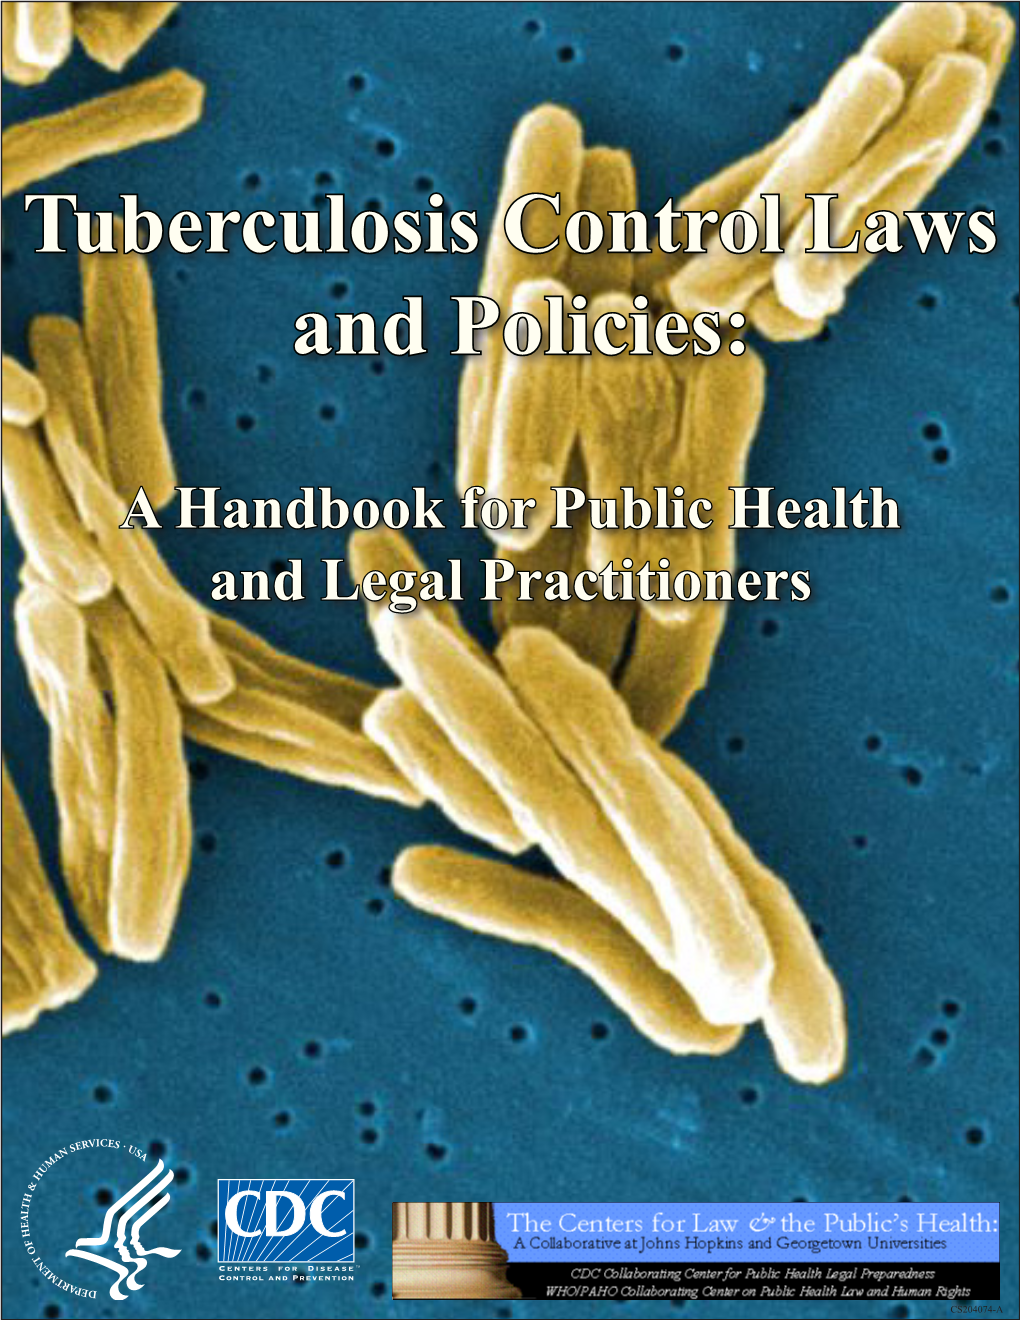 Tuberculosis Control Laws and Policies: a Handbook for Public